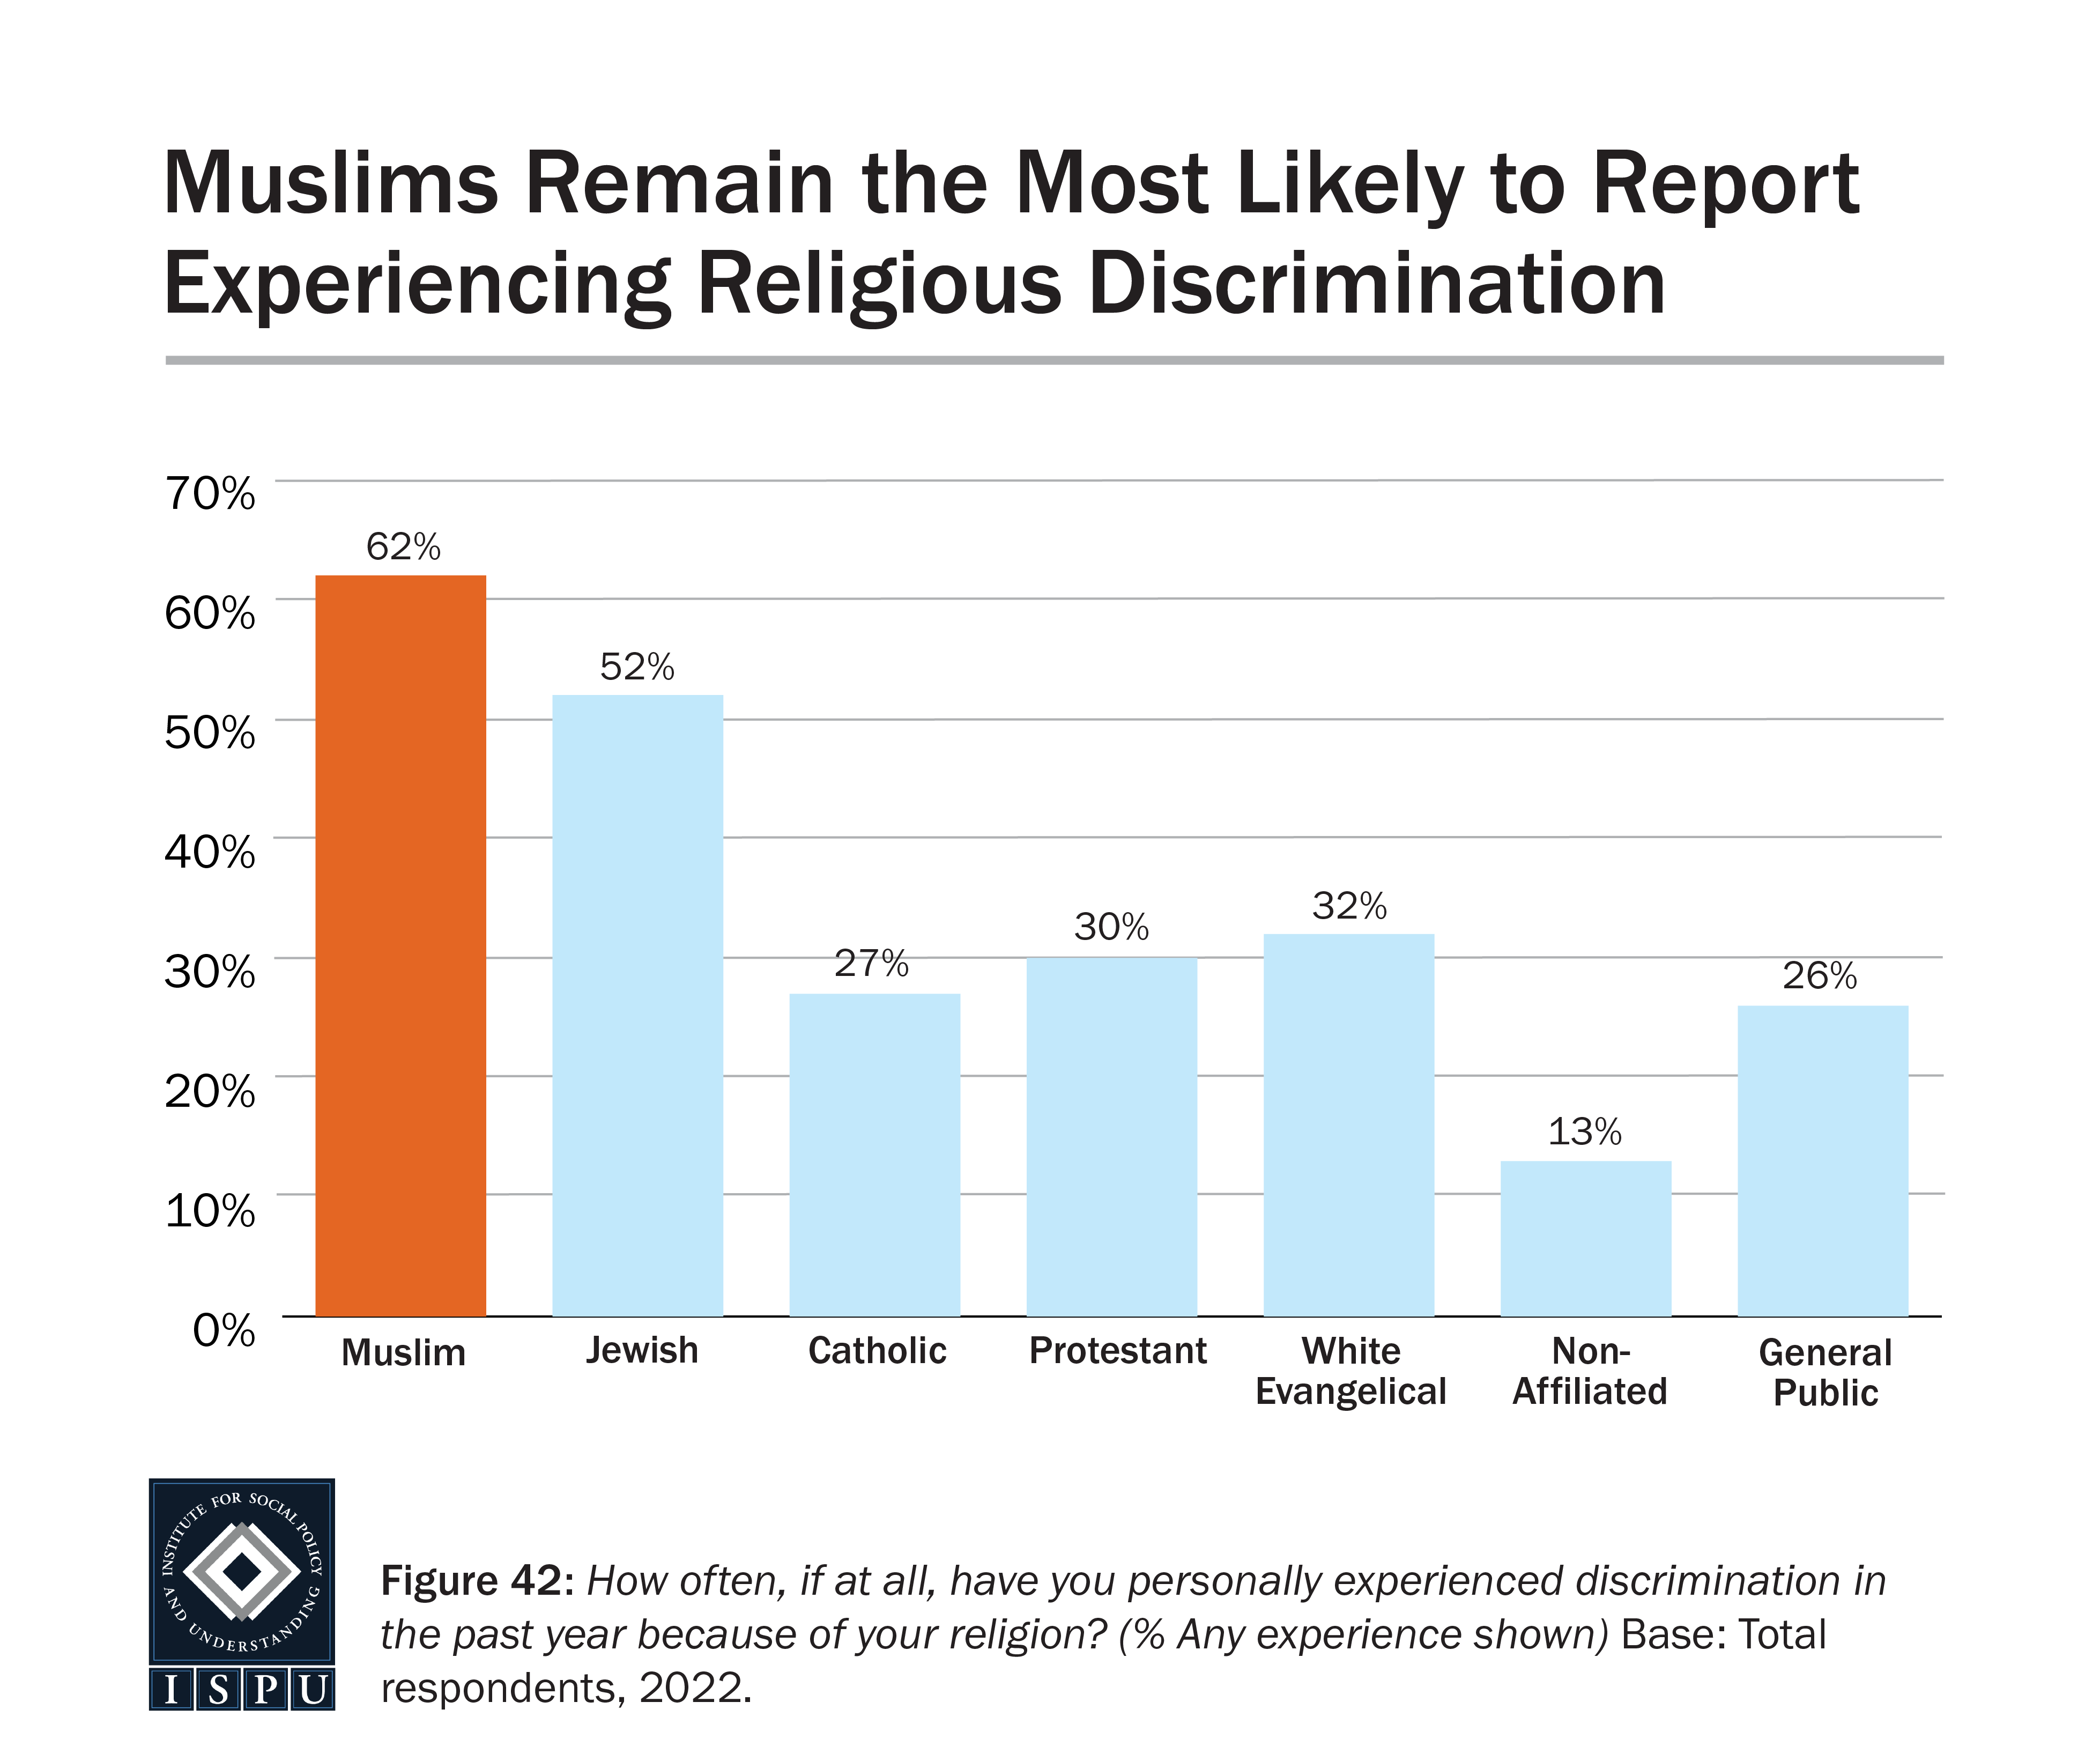 A bar graph showing the proportion of all groups surveyed who report experiencing religious discrimination in the past year.